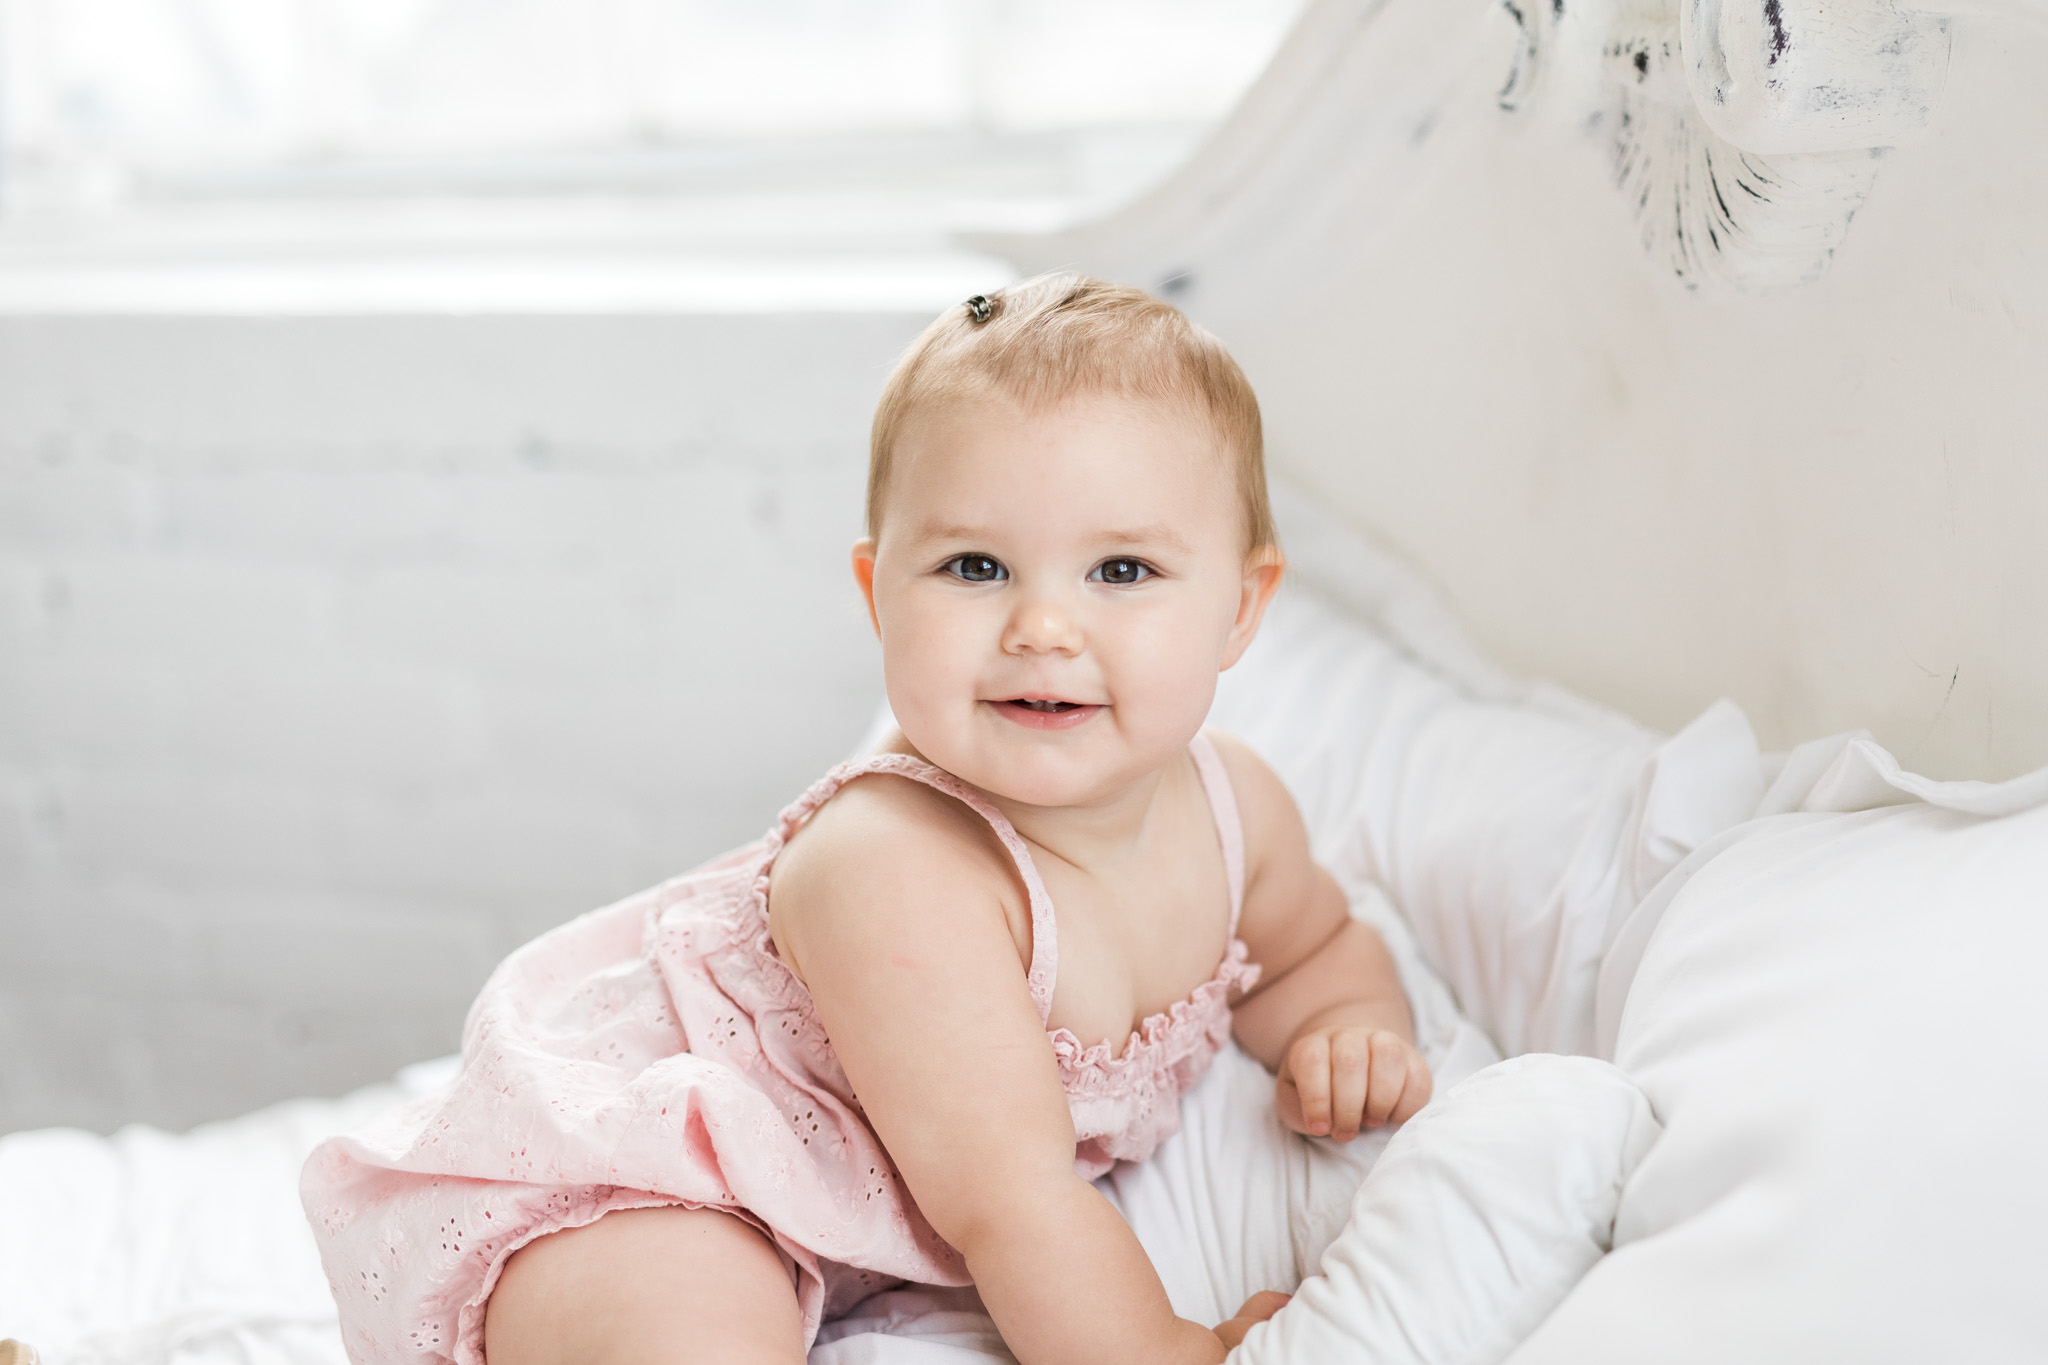 Natural Light Studio Session | One Year Old Baby Girl In Studio | All White Studio | Laurenda Marie Photography